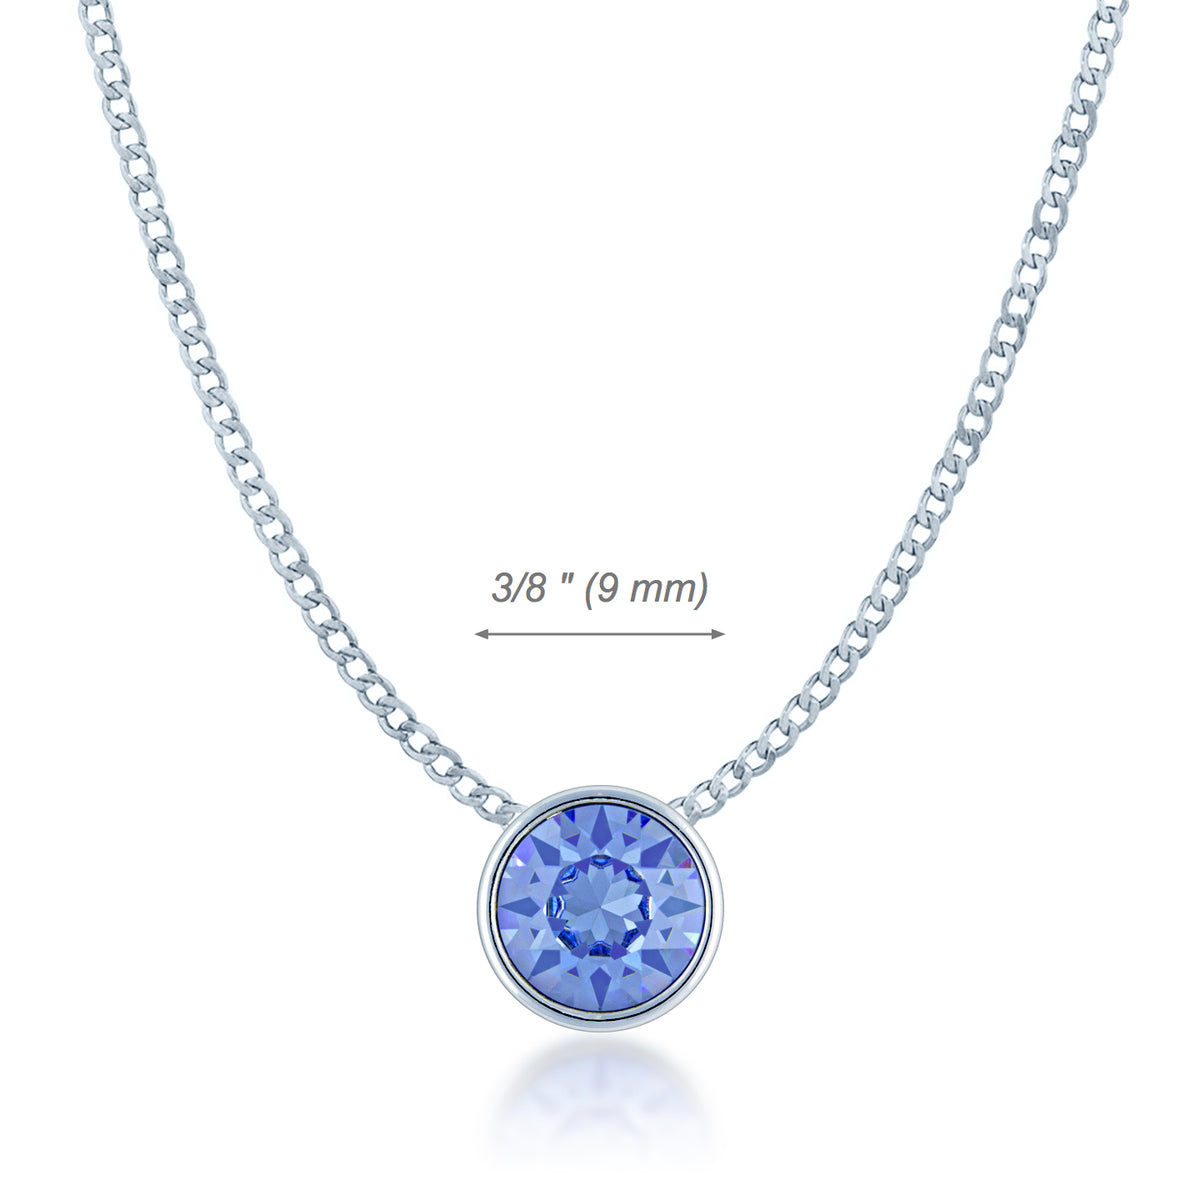 Harley Small Pendant Necklace with Blue Light Sapphire Round Crystals from Swarovski Silver Toned Rhodium Plated - Ed Heart